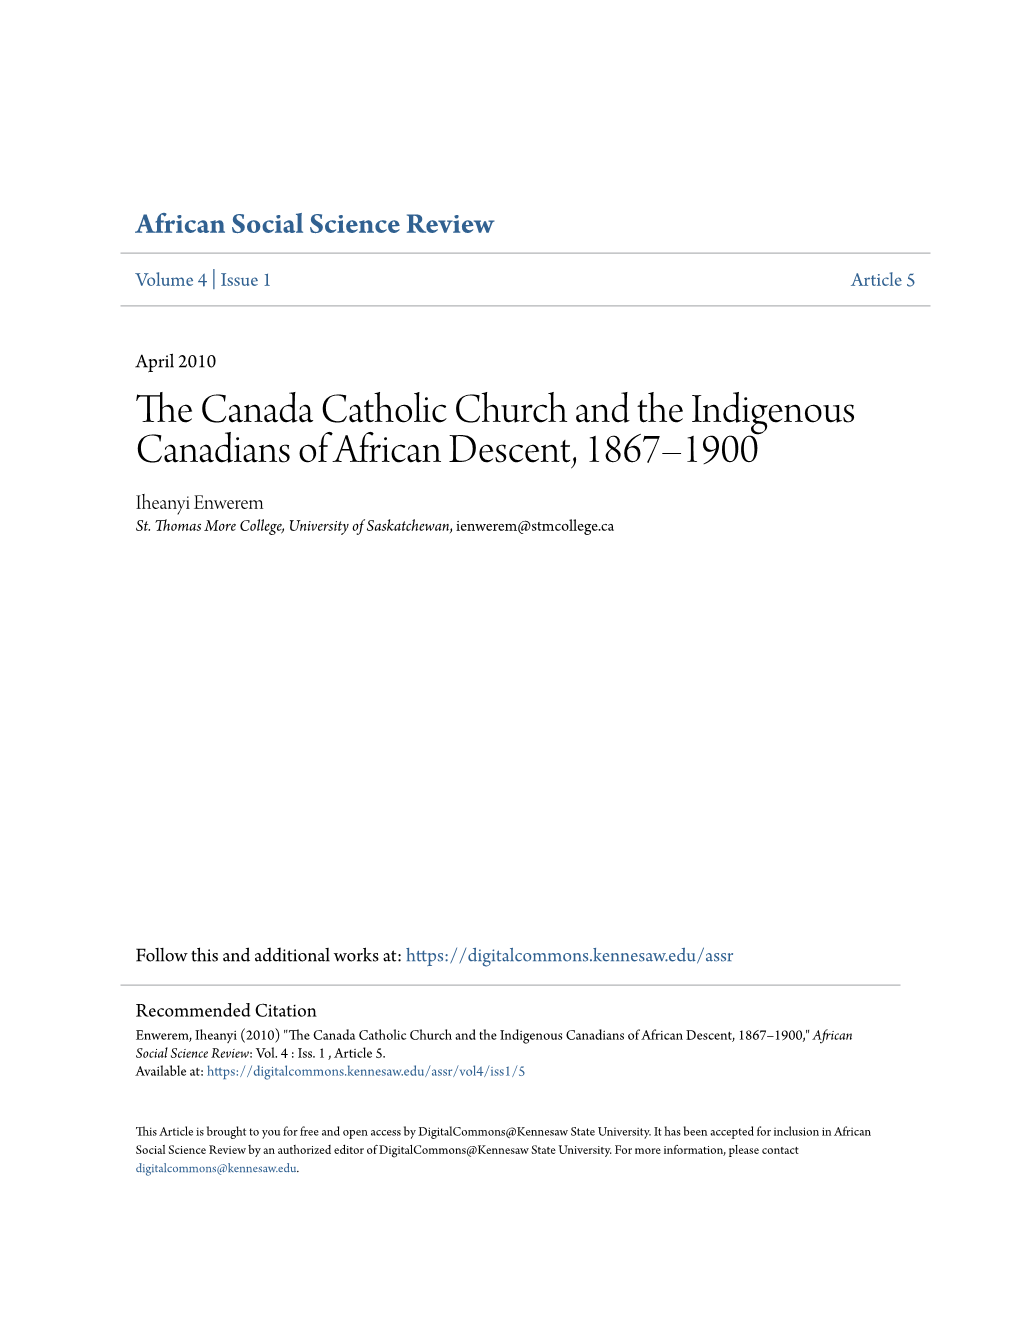 The Canada Catholic Church and the Indigenous Canadians of African Descent, 1867–1900